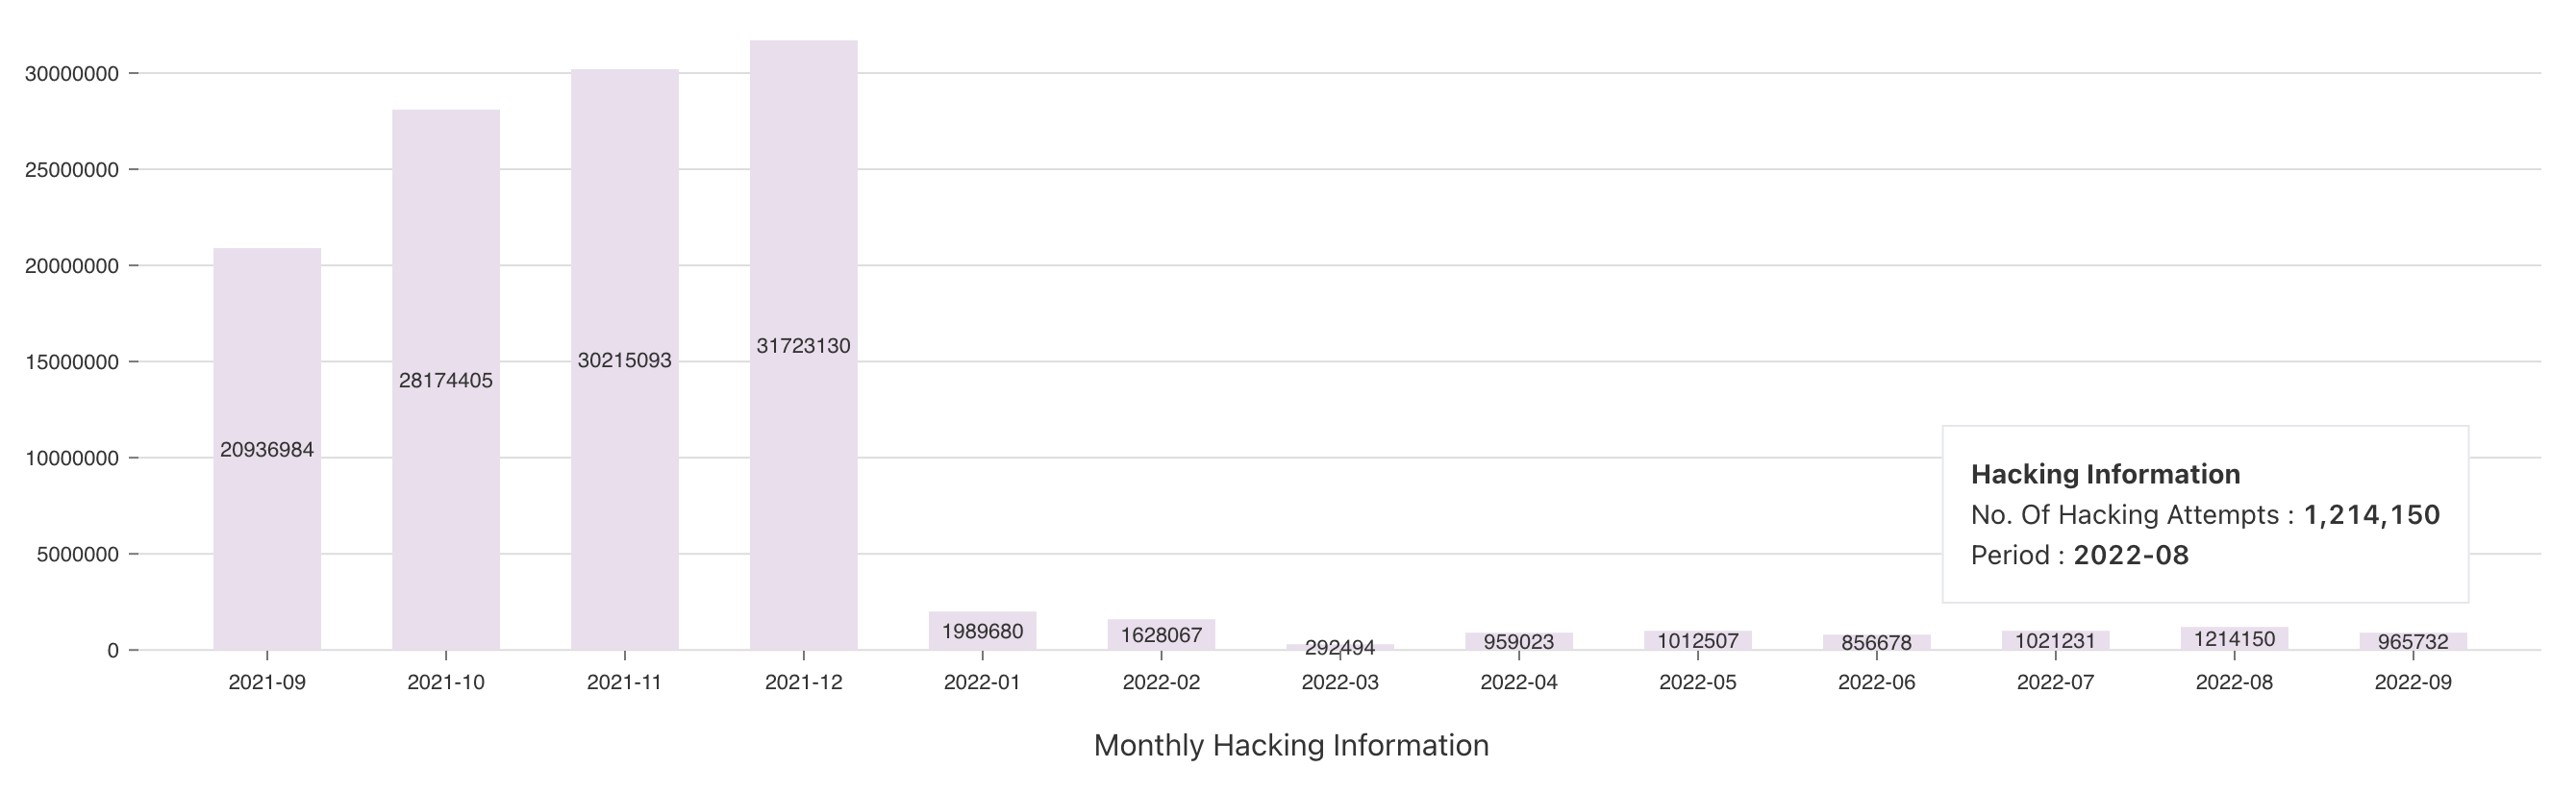 Monthly Hacking Information